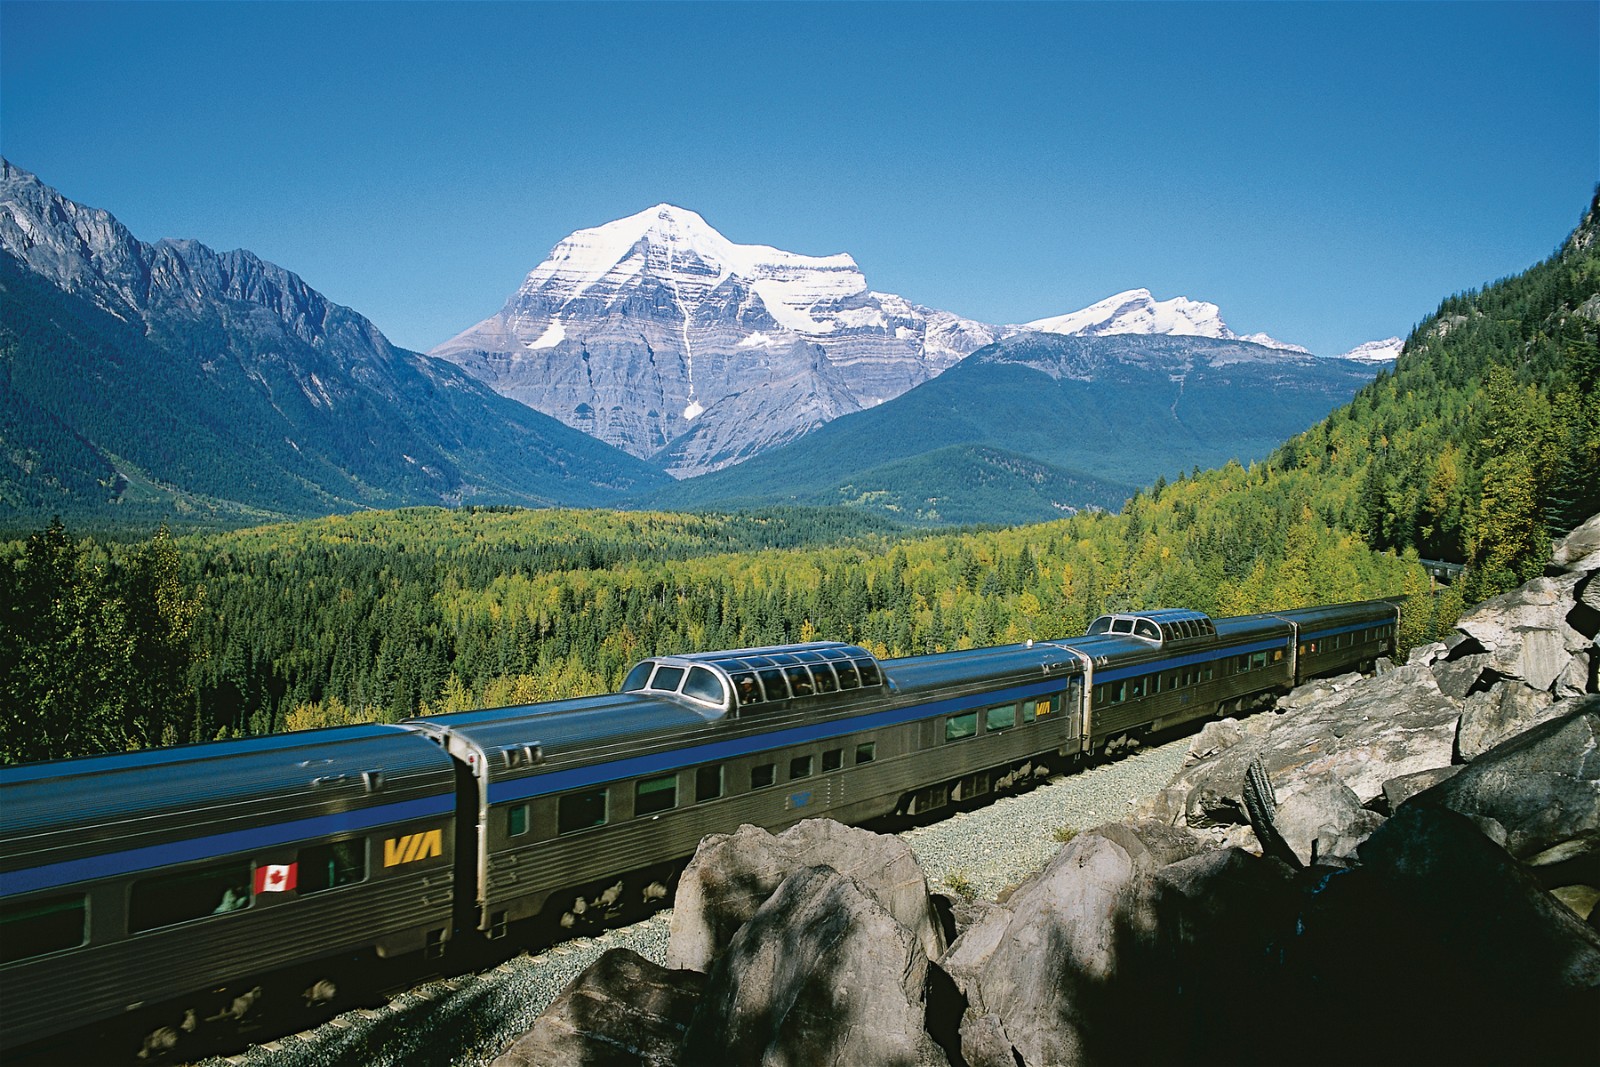 The Trans-Canada Express journey starts in Vancouver, British Columbia, and ends in Toronto, Ontario.